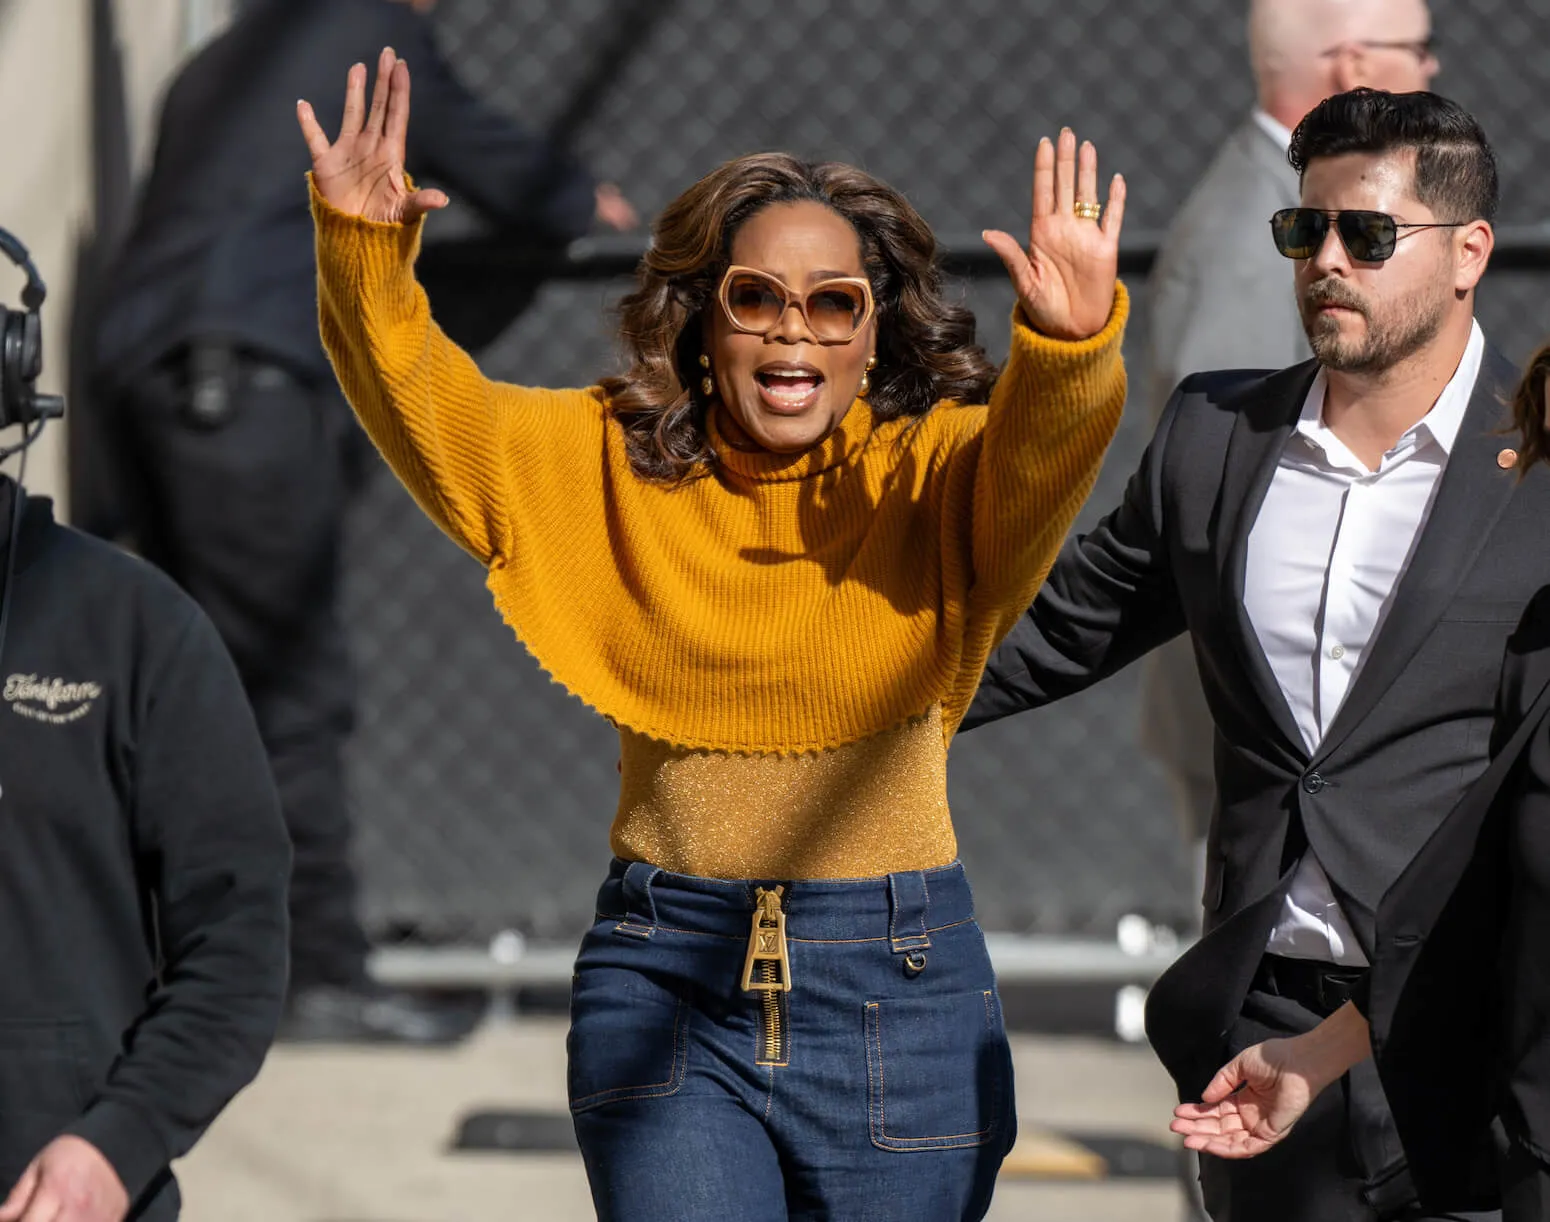 Oprah Winfrey holding her hands up while outside. She's wearing a yellow sweater and sunglasses.